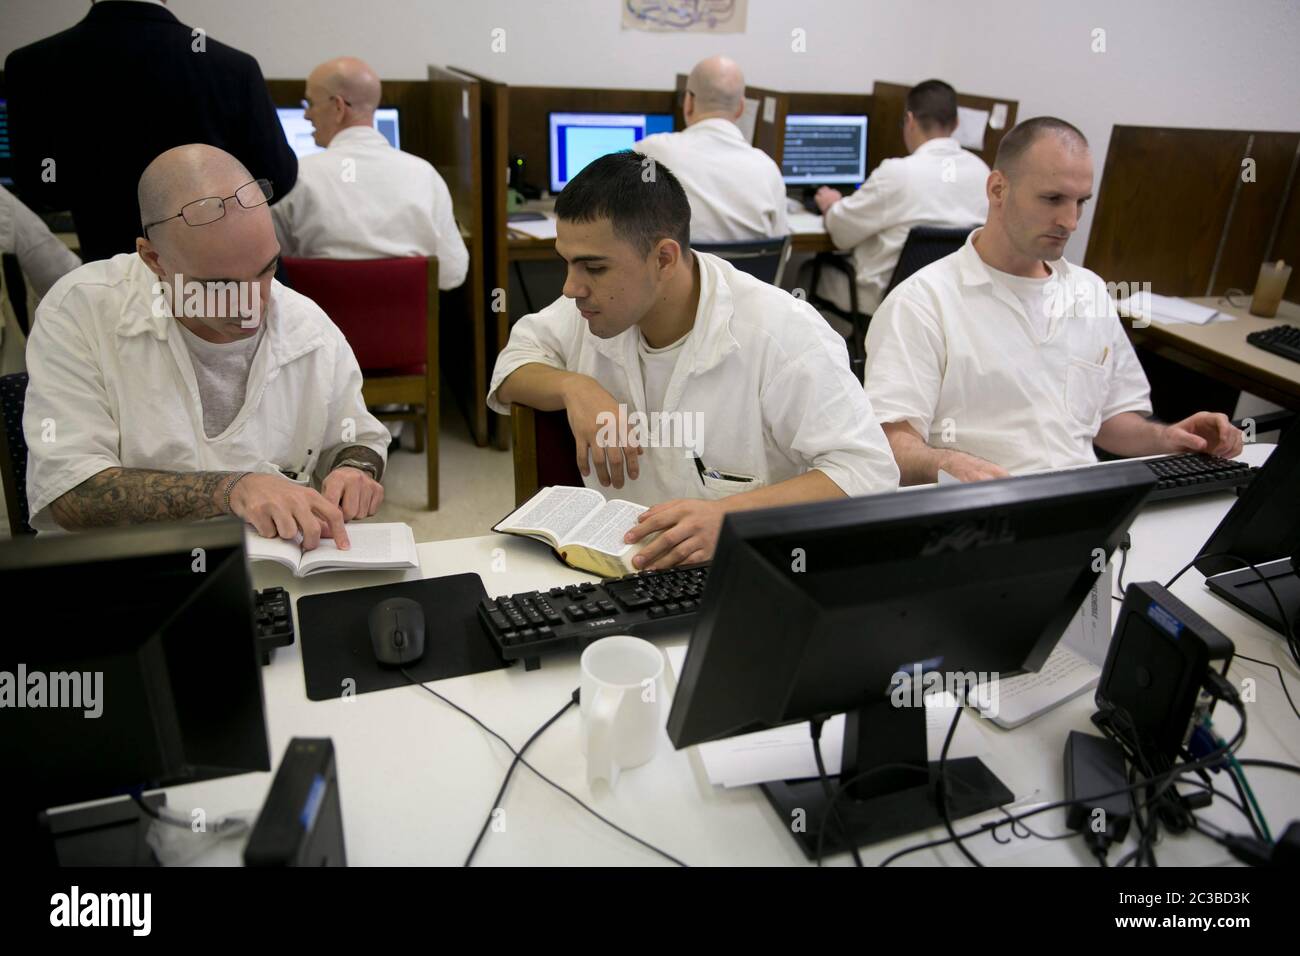 Rosharon Texas USA, August 25 2014: Male prison inmates, students who are enrolled in the Southwestern Baptist Theological Seminary program at Darrington prison, use computers in their classroom, where they are allowed to interact with each other.   ©Marjorie Kamys Cotera/Daemmrich Photography Stock Photo